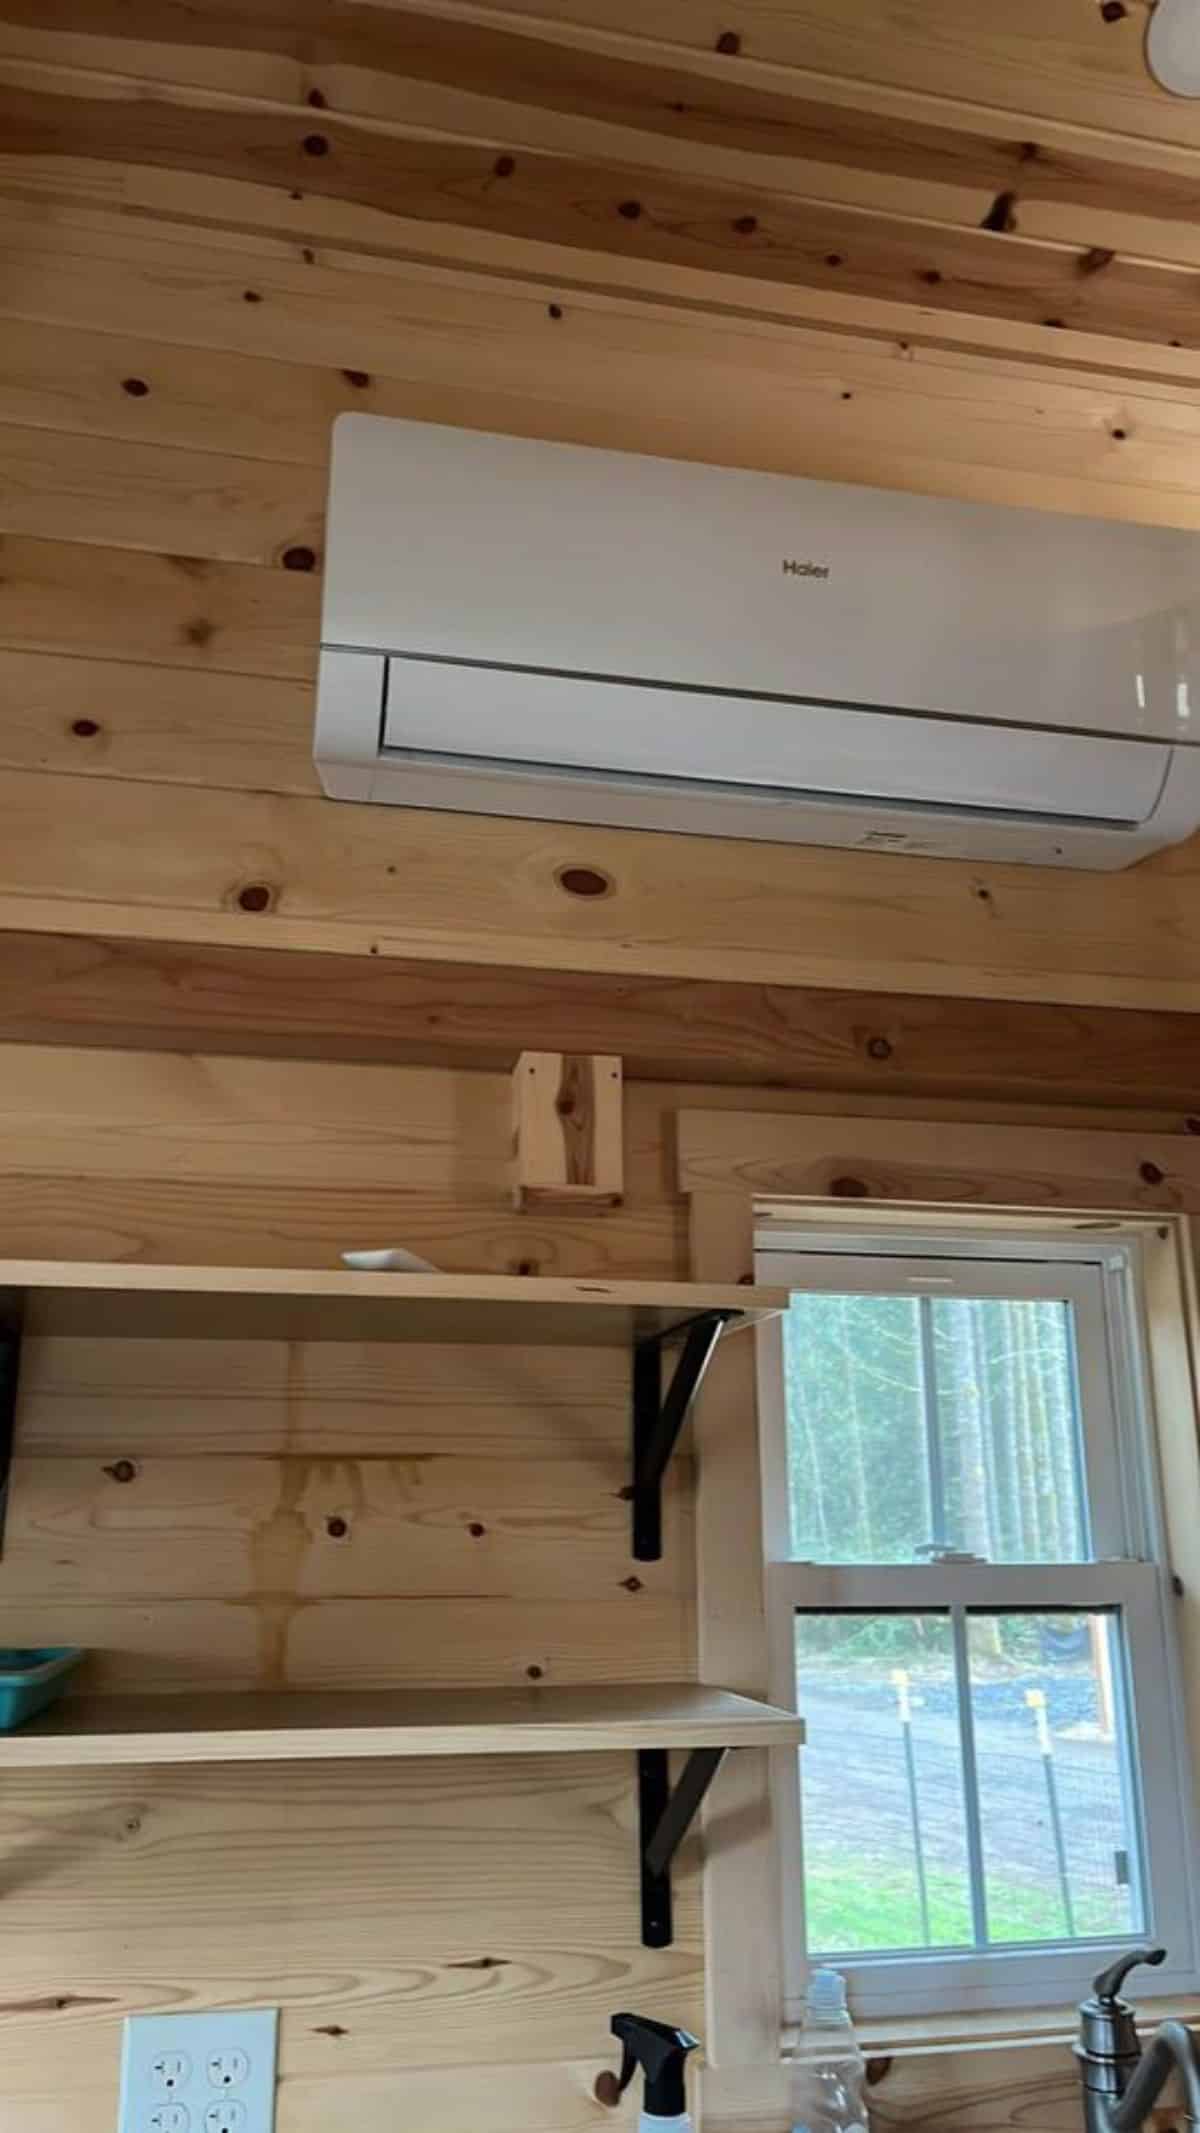 shelves and split A/c unit installed in the kitchen and